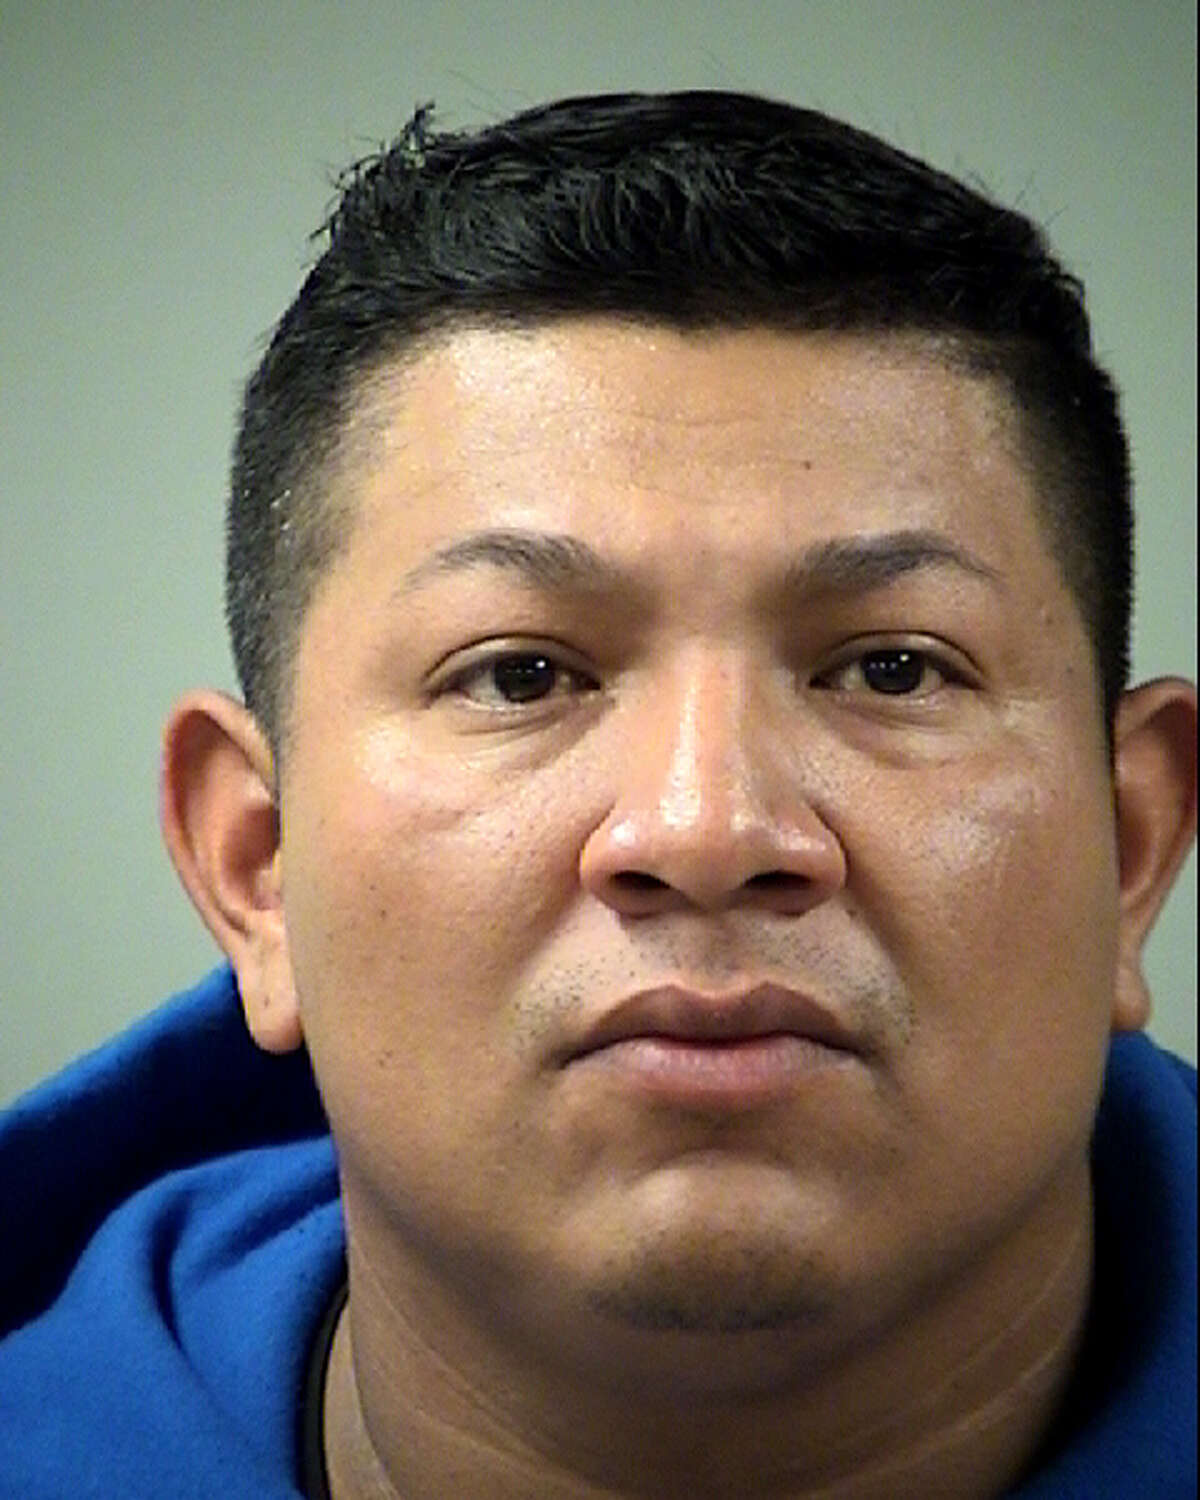 Martin Gutierrez Jr. faces a charge of theft for allegedly stealing more than $15,000 worth of wood glue from his employer, according to an arrest warrant affidavit.